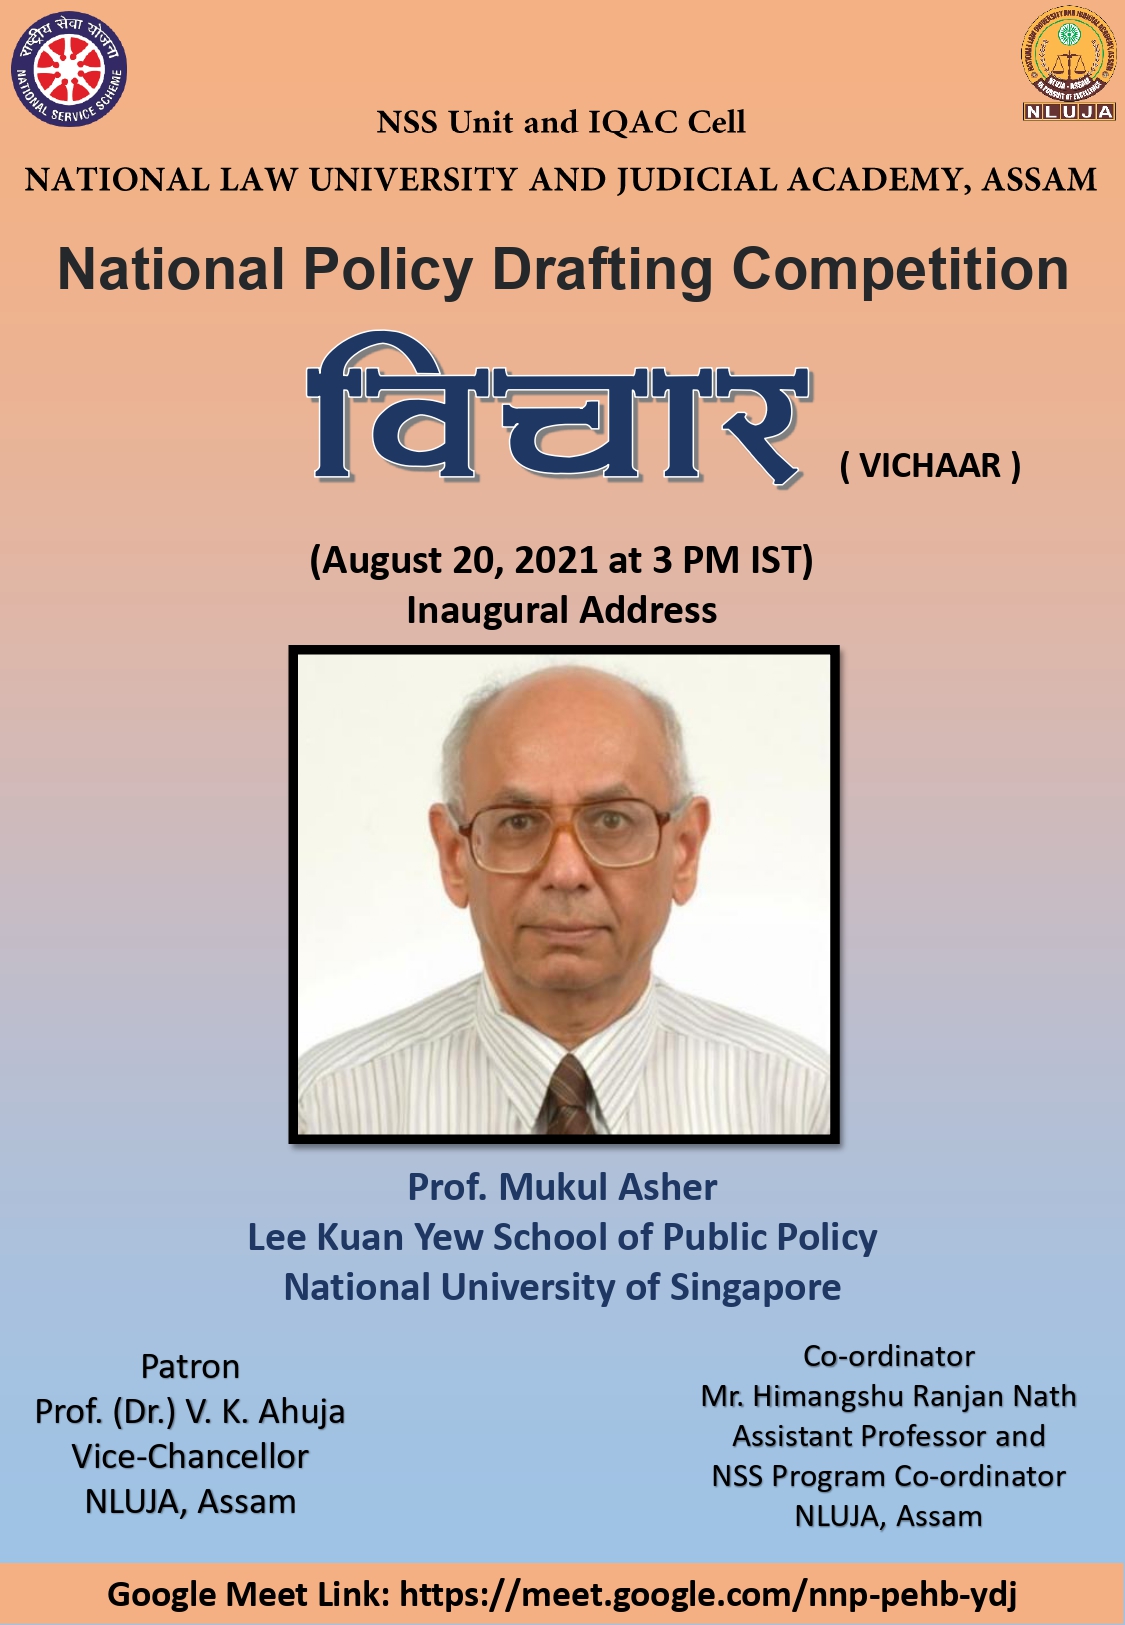 NLU Assam: National Policy Drafting Competition- विचार (VICHAAR) [Register by 12th September, 2021]